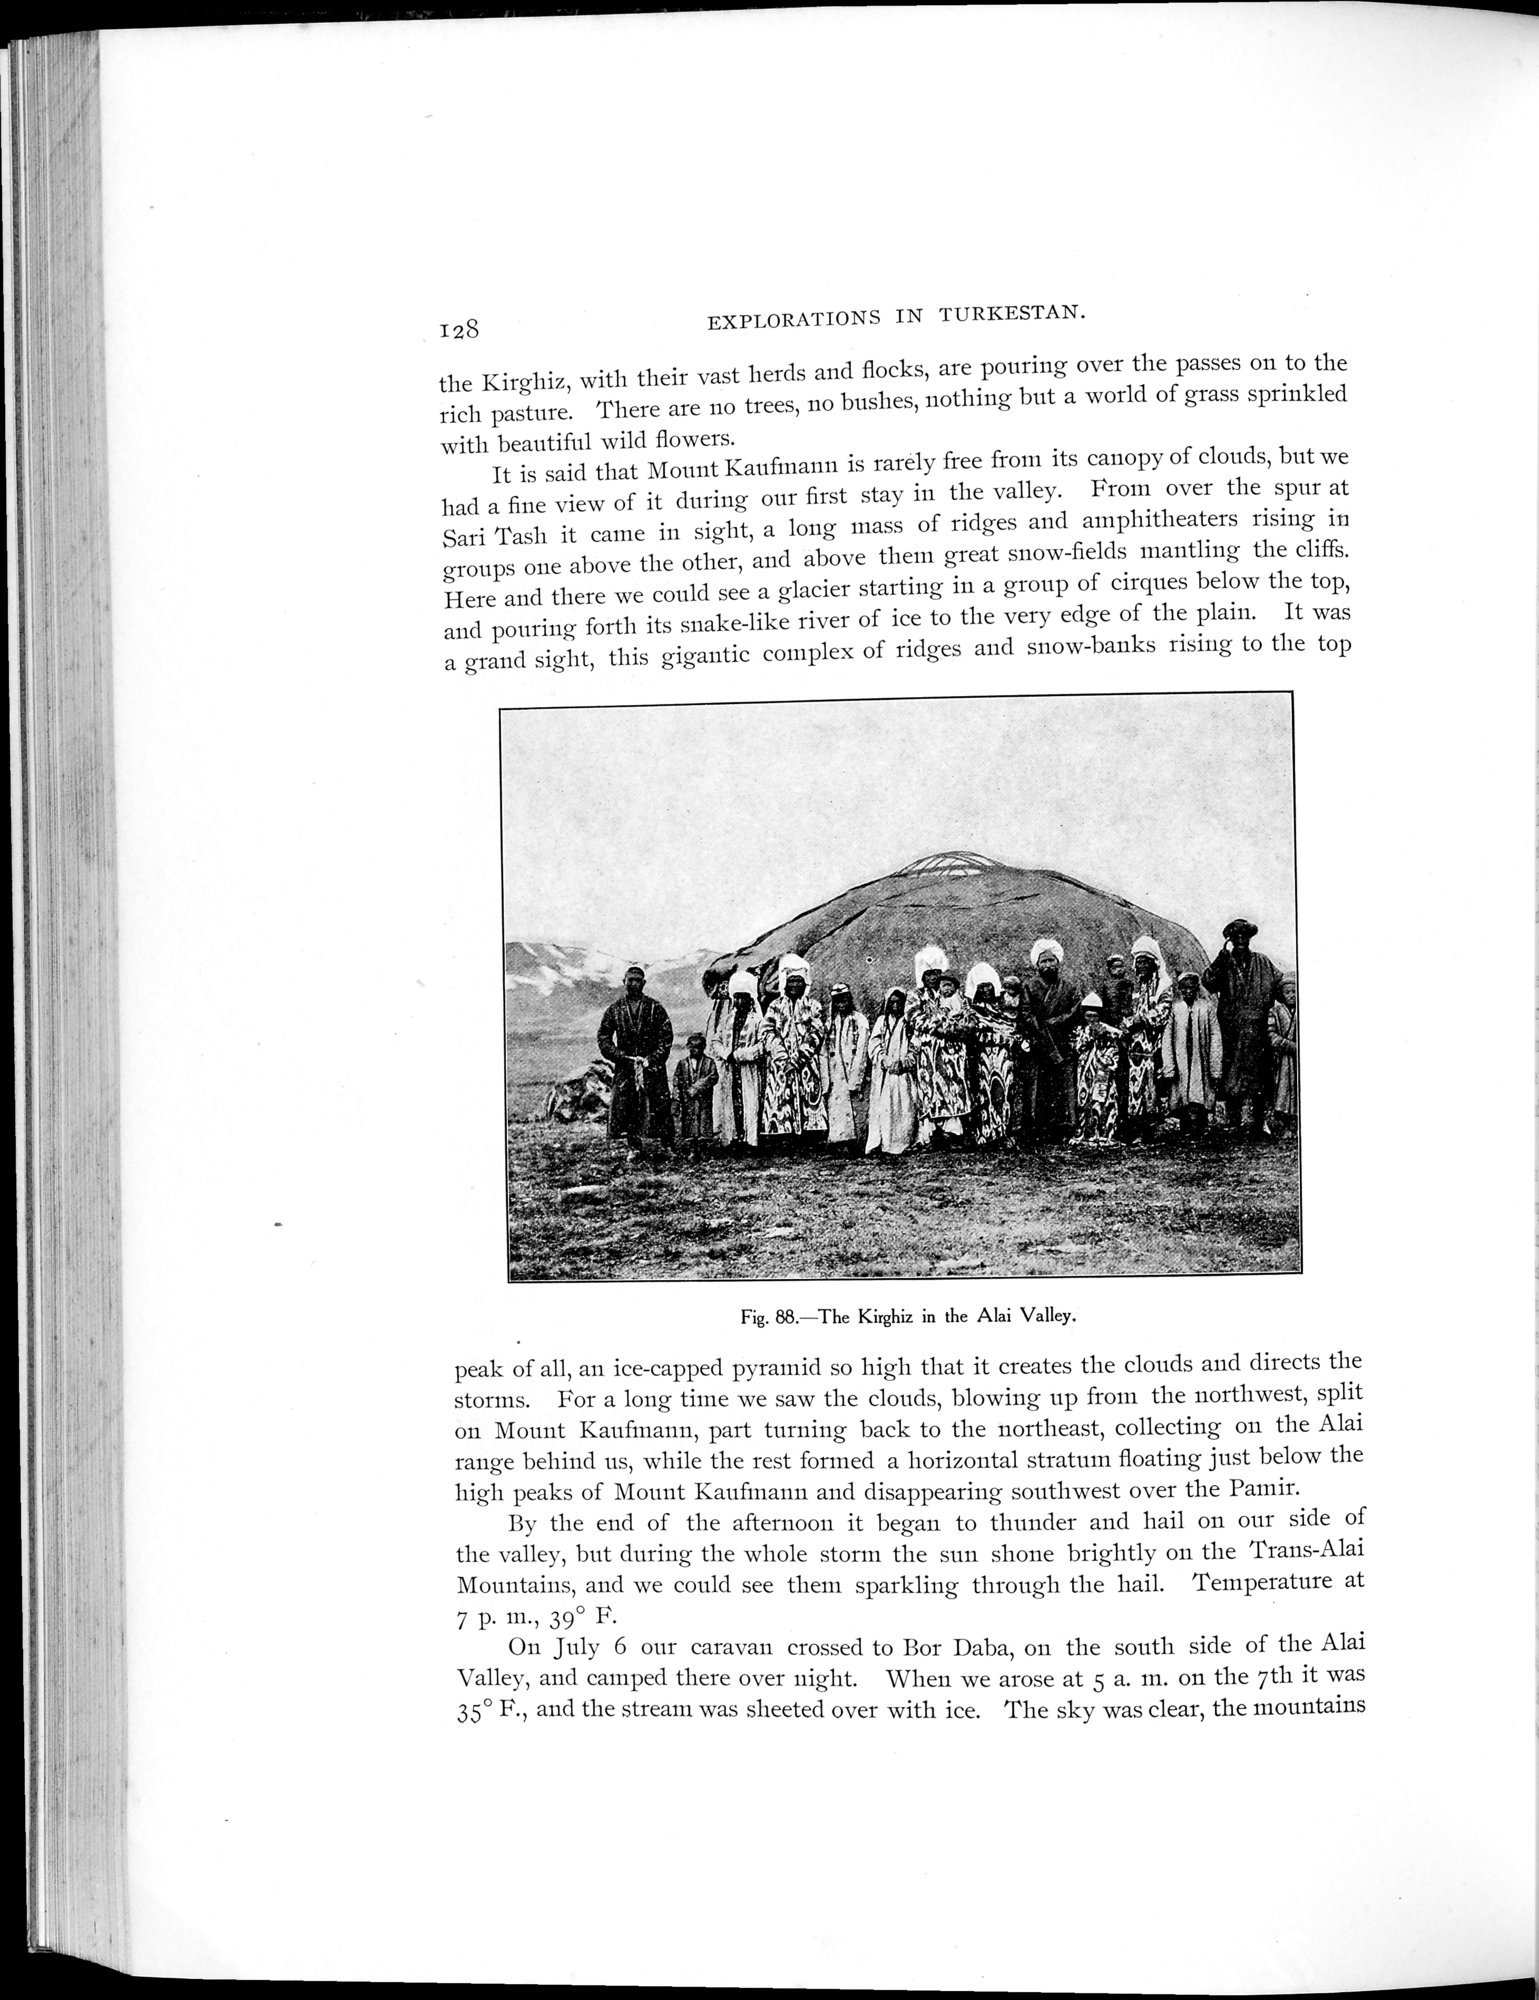 Explorations in Turkestan 1903 : vol.1 / Page 152 (Grayscale High Resolution Image)